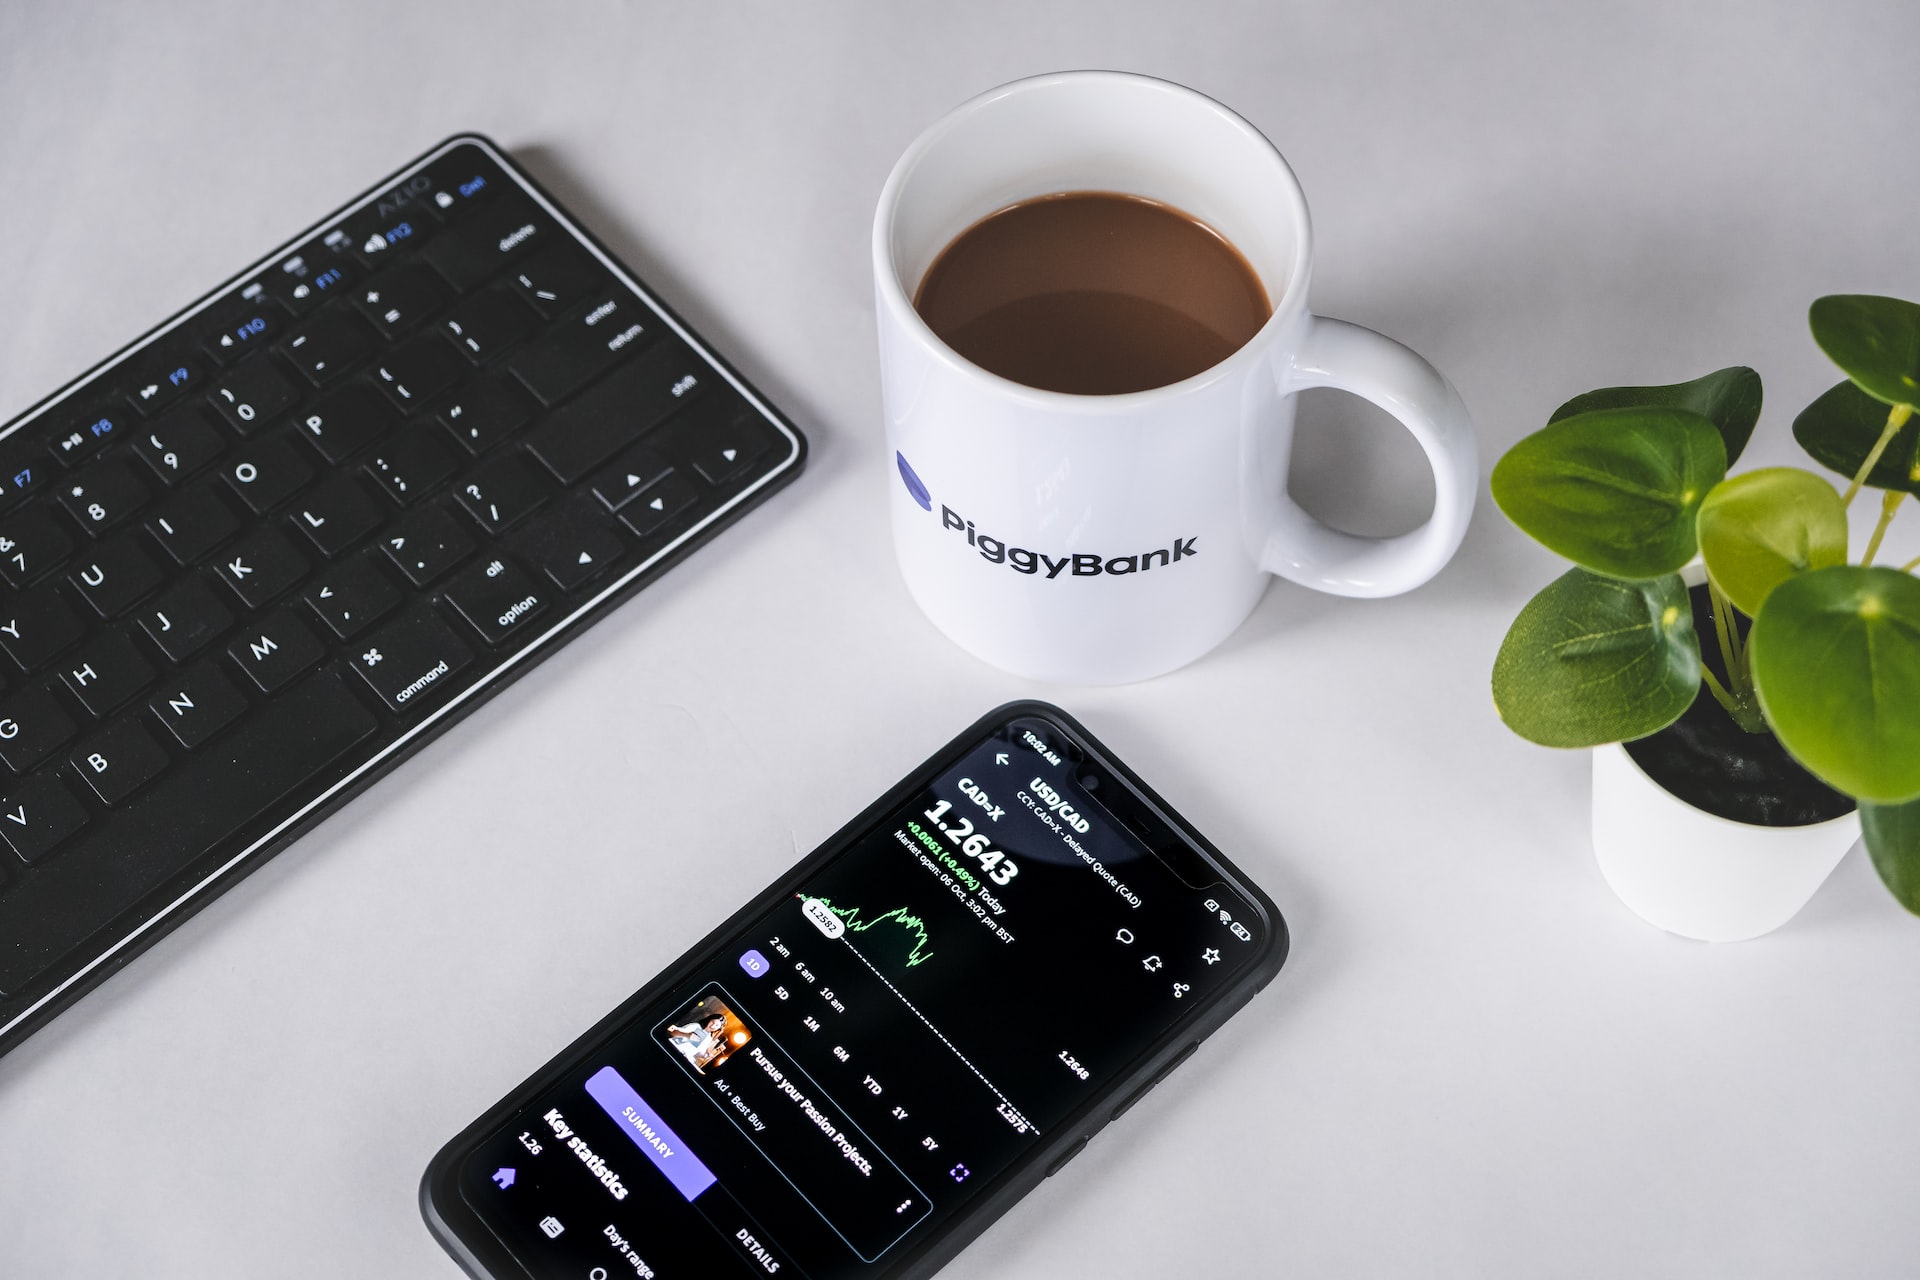 banking app on a phone, beside a keyboard and cup of coffee